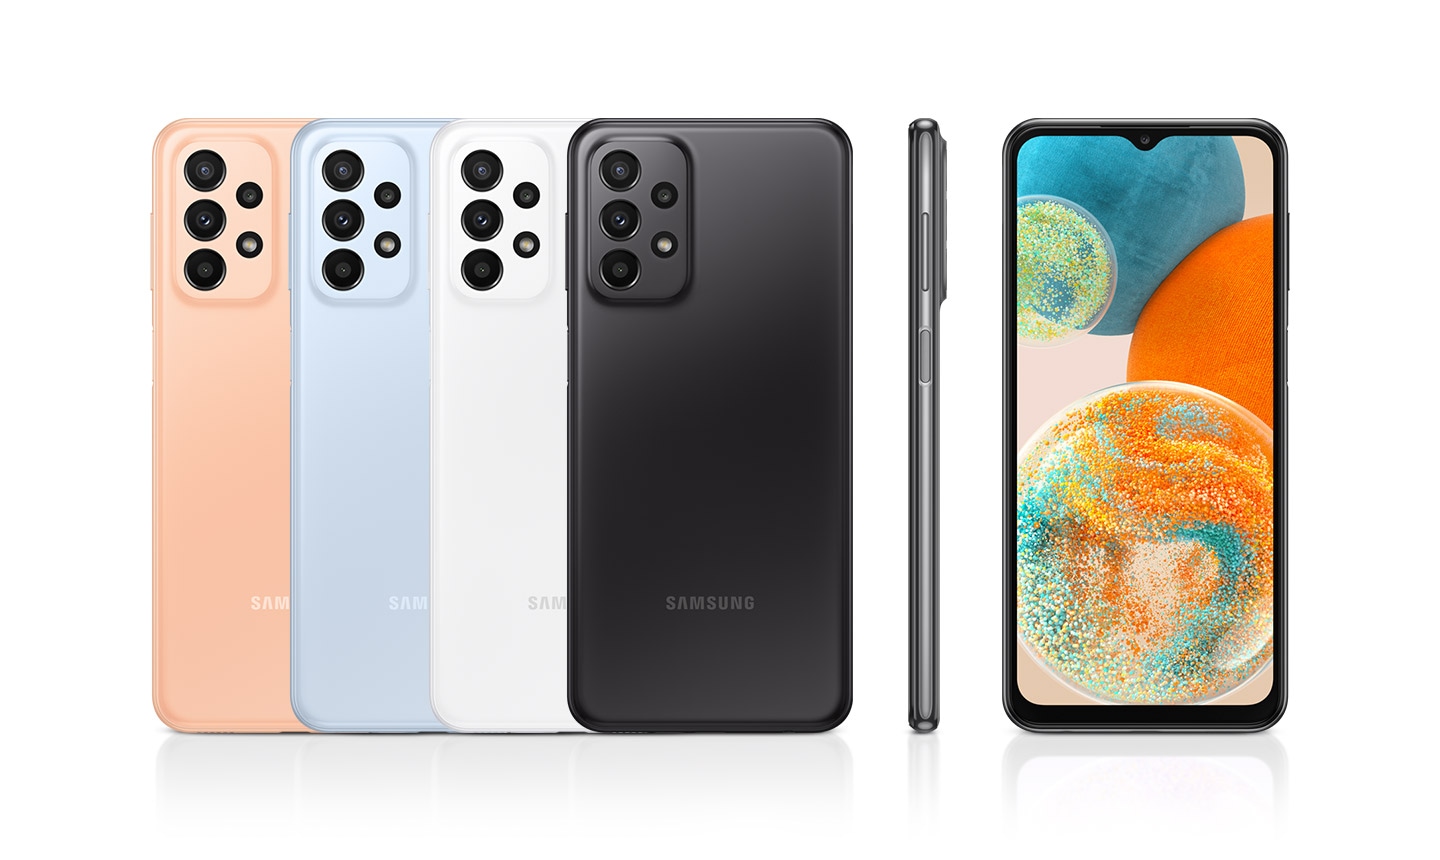 Six devices are displayed to appeal their colors and design. Four reversed ones are in orange, light blue, white and black\ while one is looking at the front and another showing the right side of device.